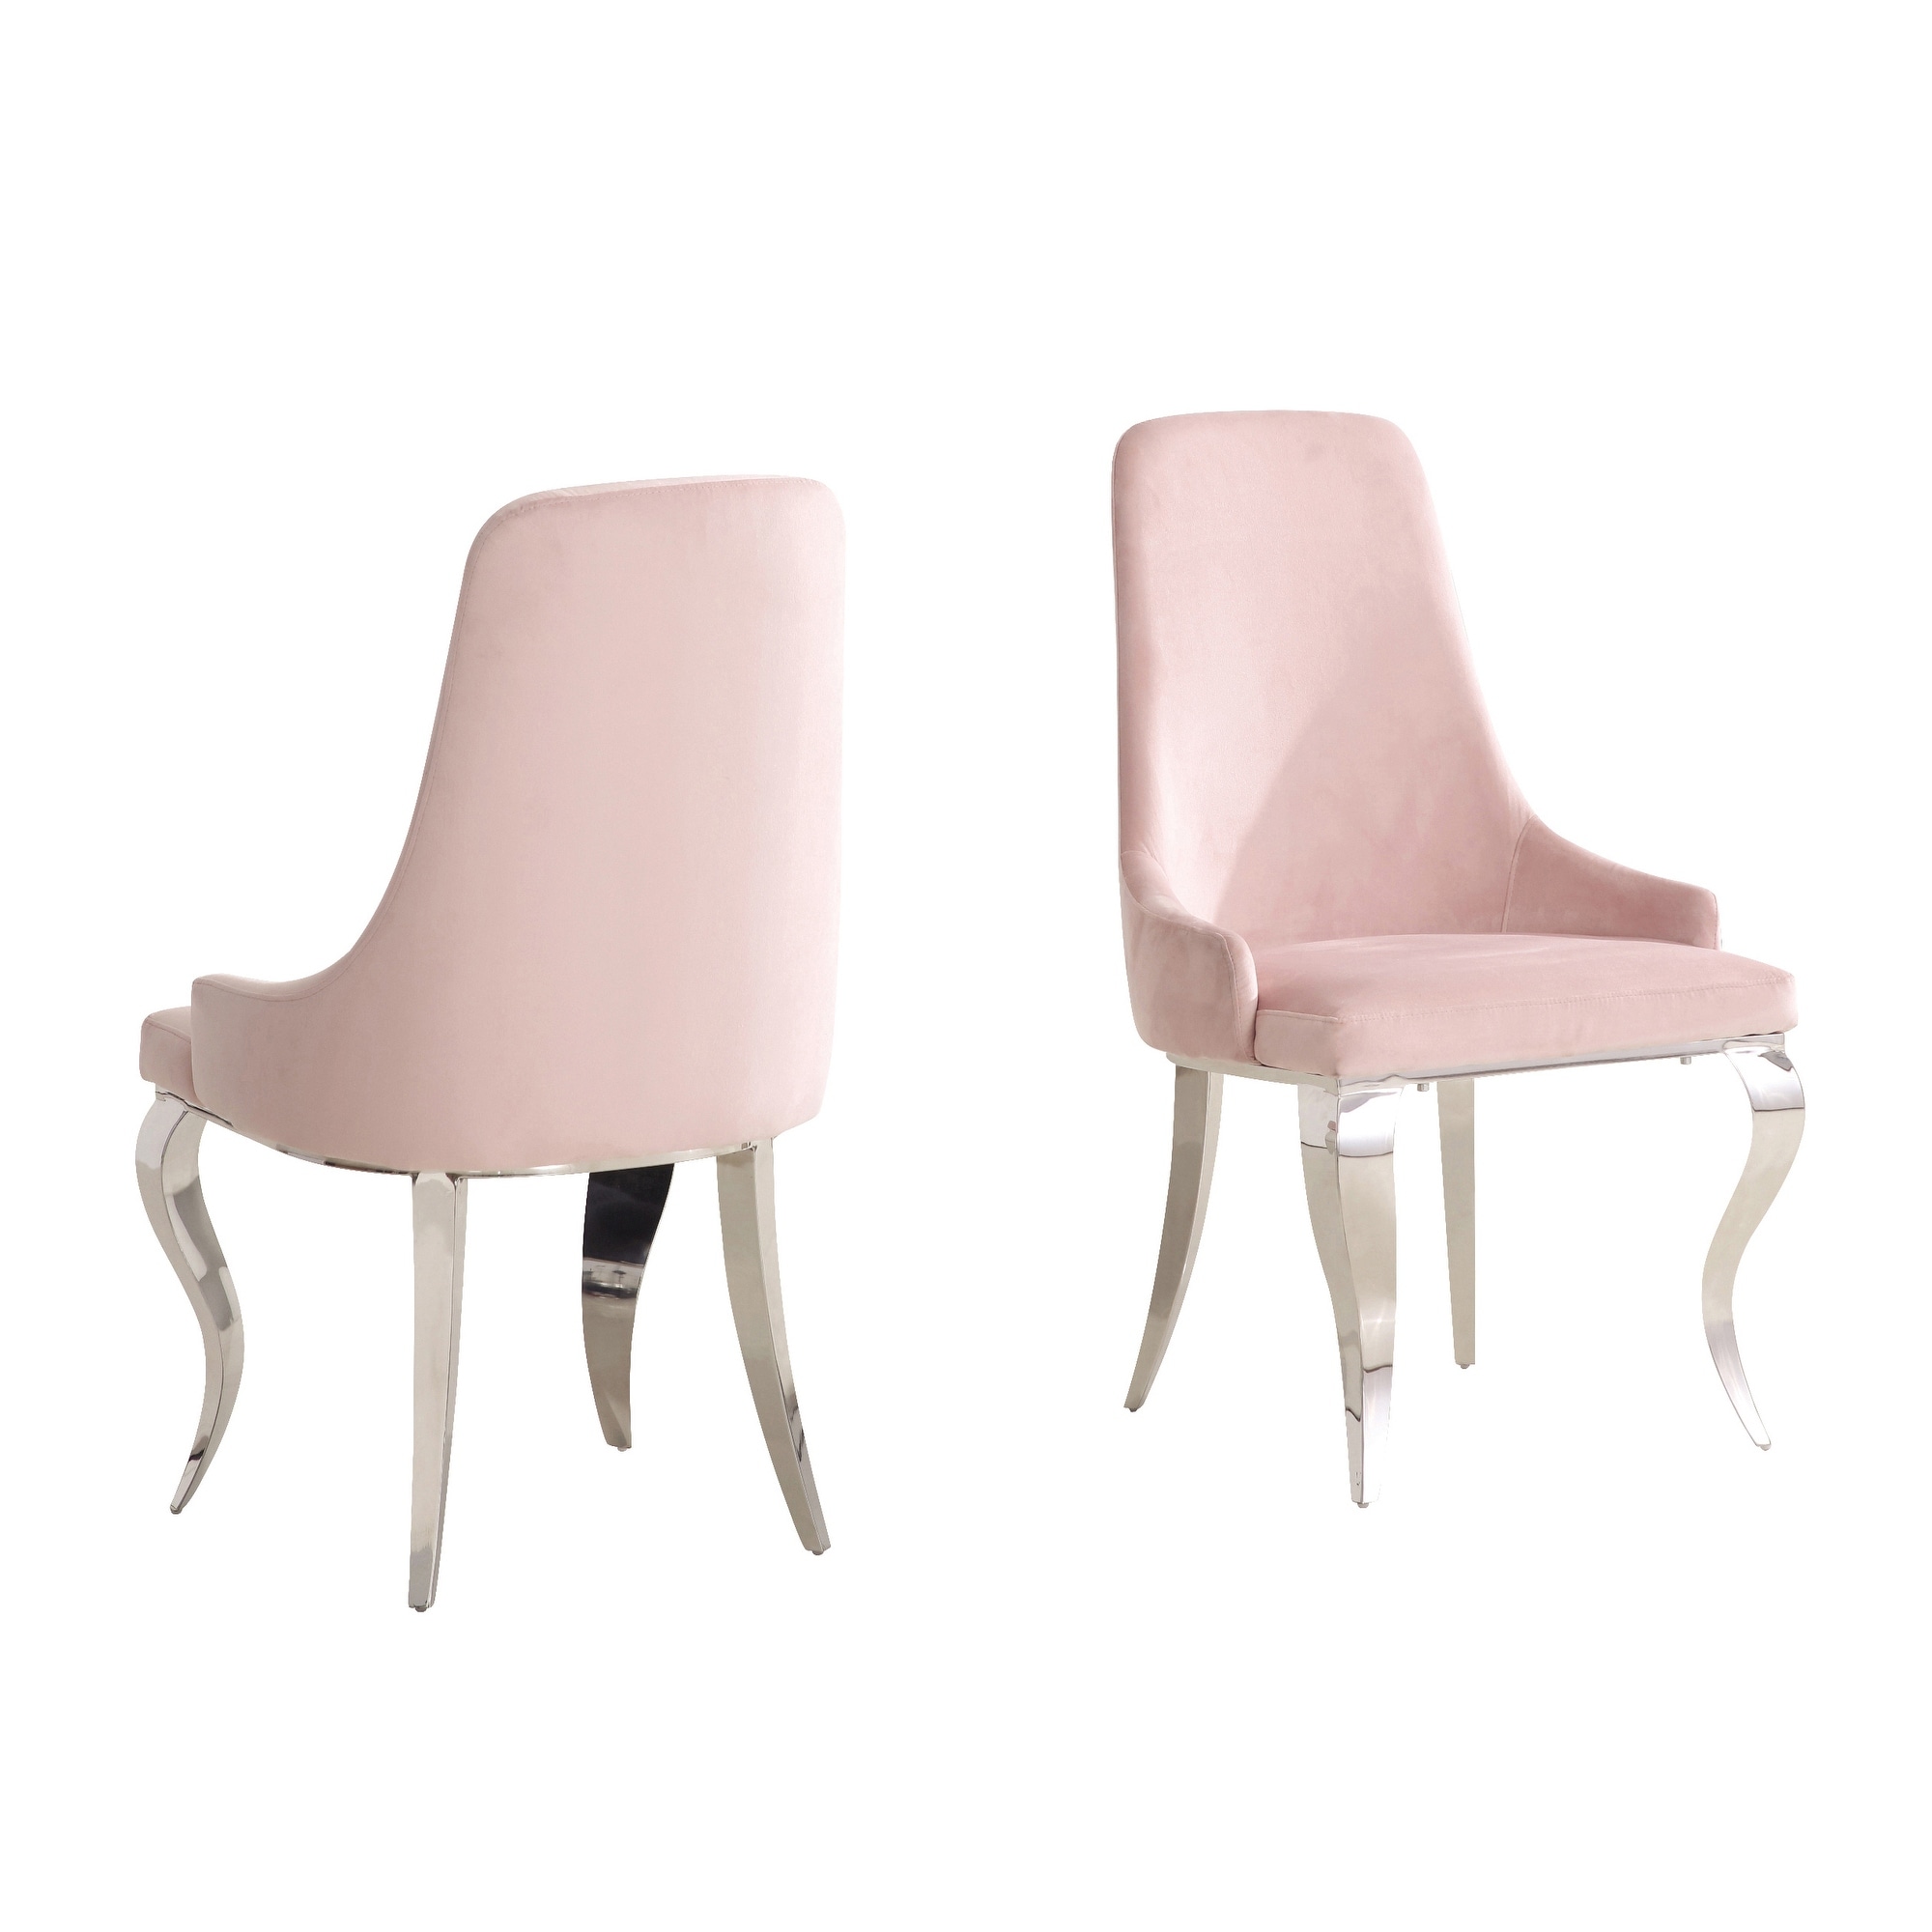 Coaster Furniture Antoine Upholstered Demi Arm Dining Chairs (Set of 2)